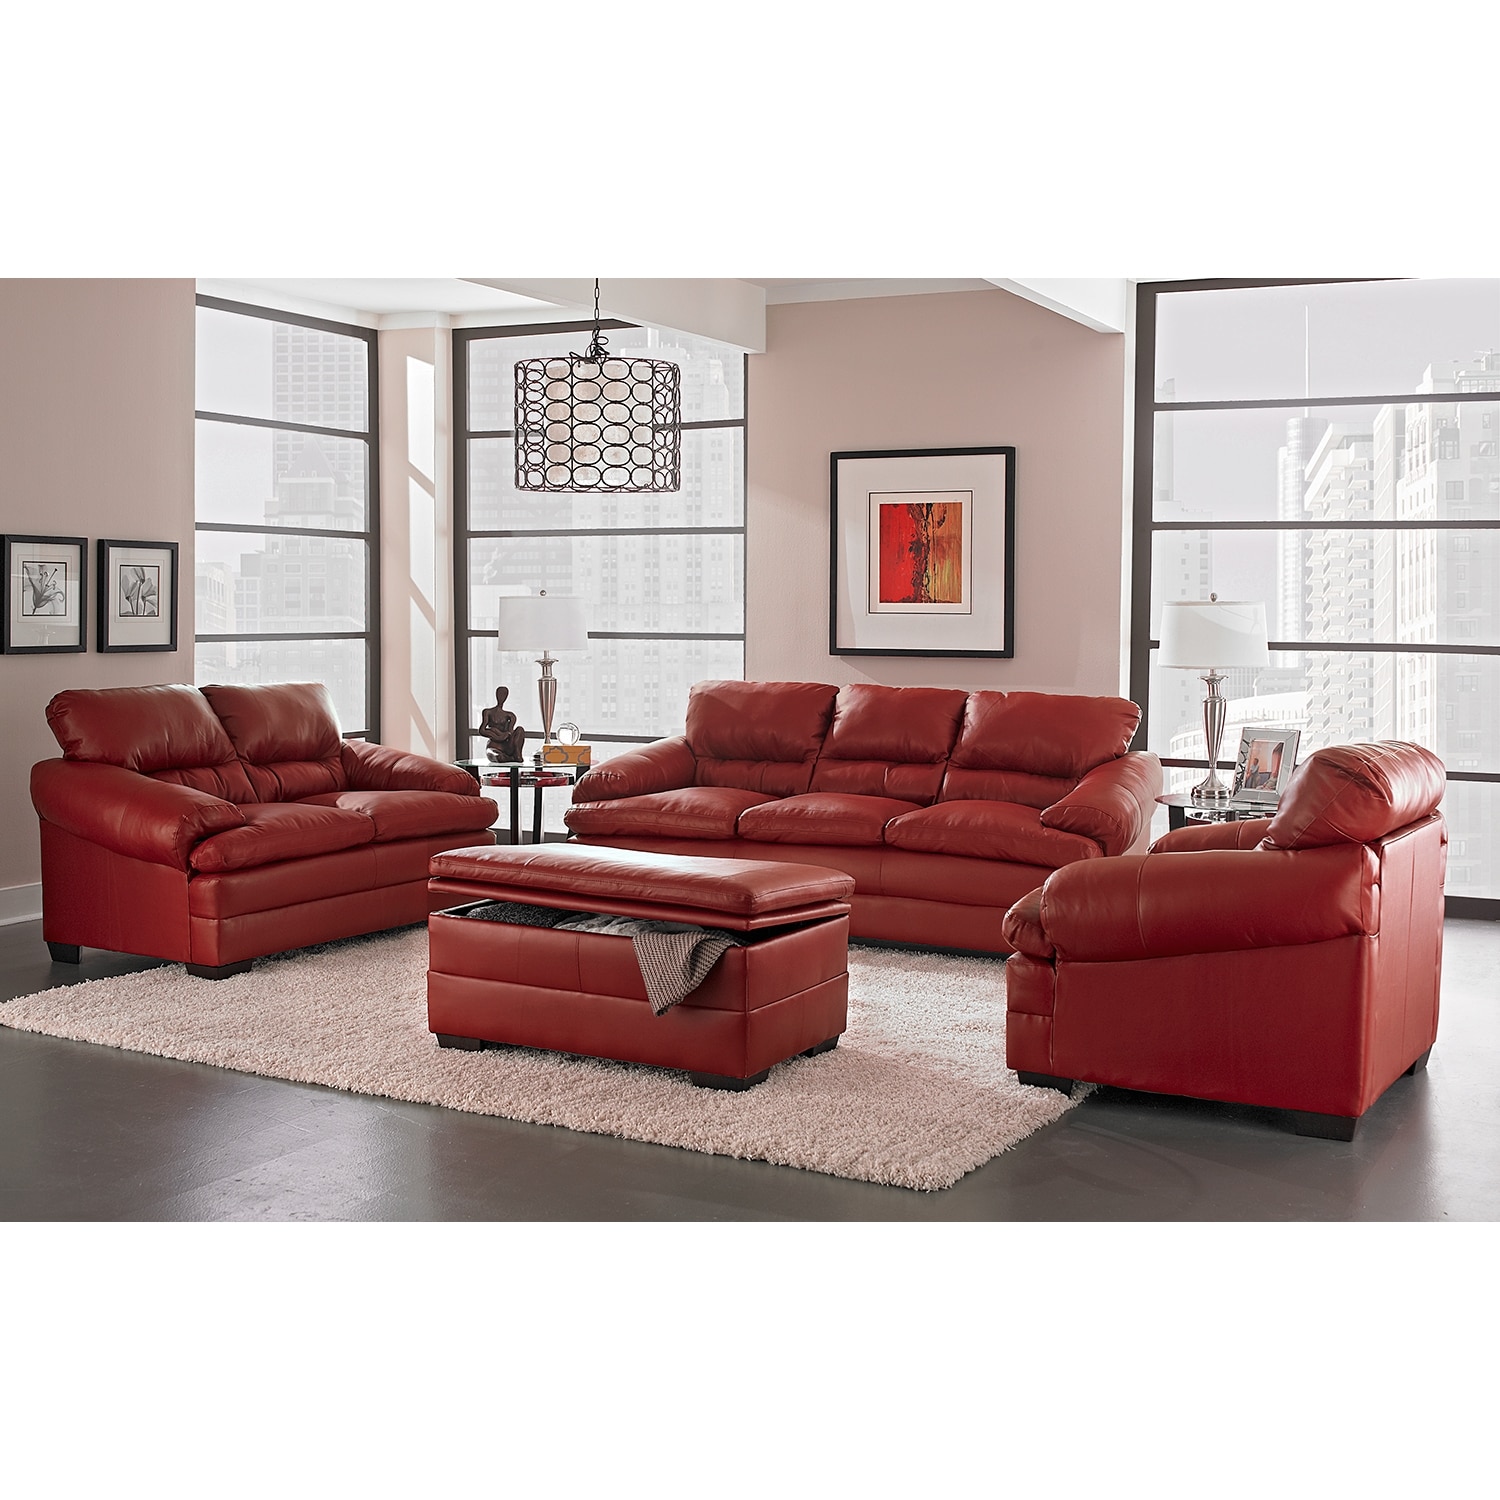 Value City Furniture Leather Living Room Sets Zion Star